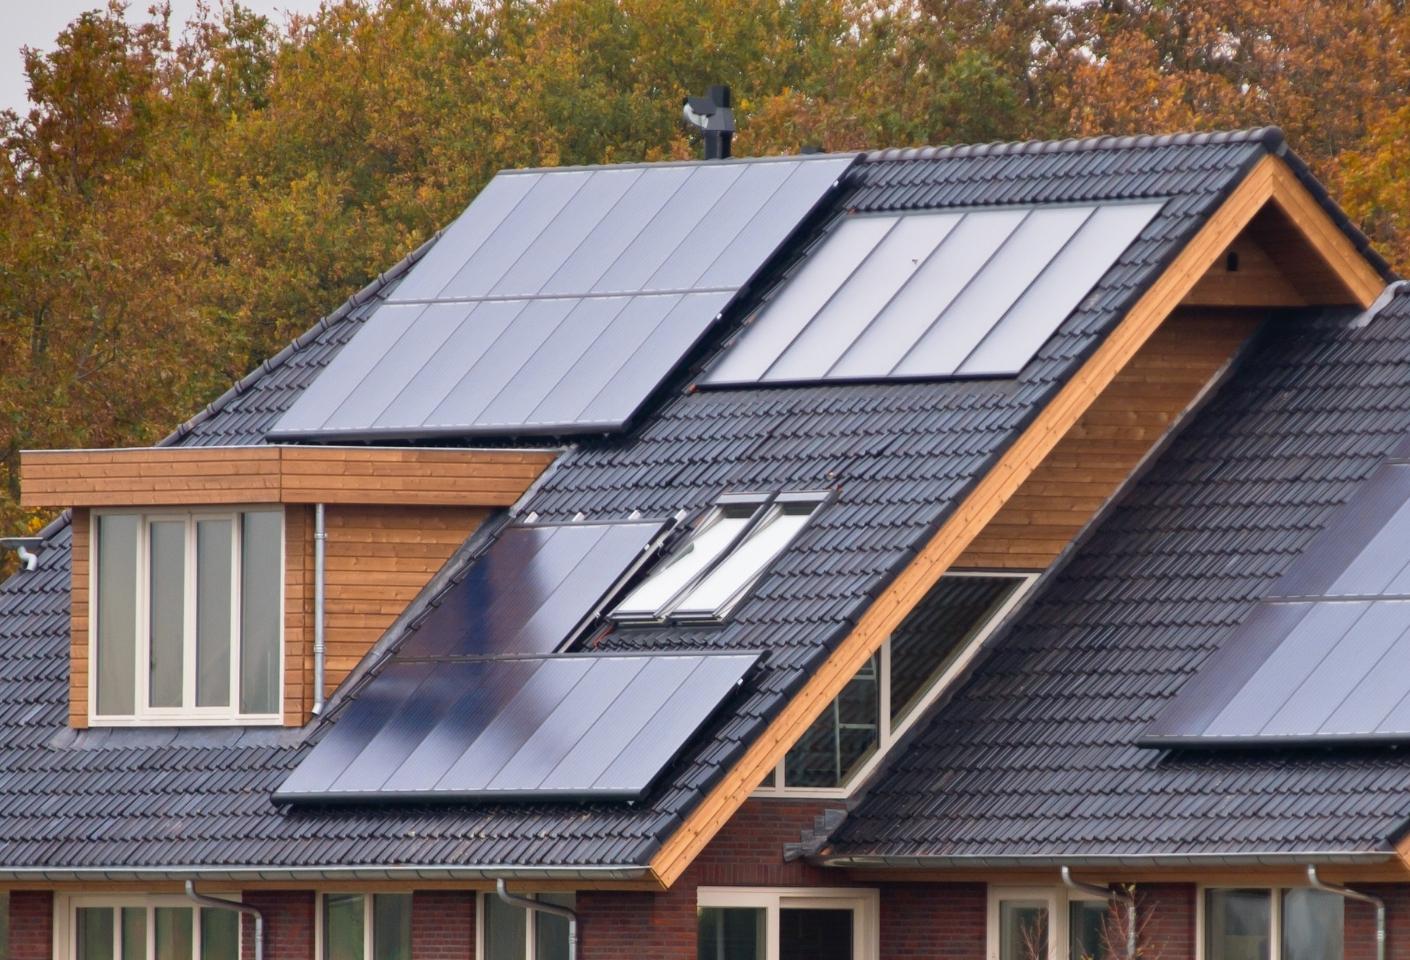 Solar panels on a residential roof